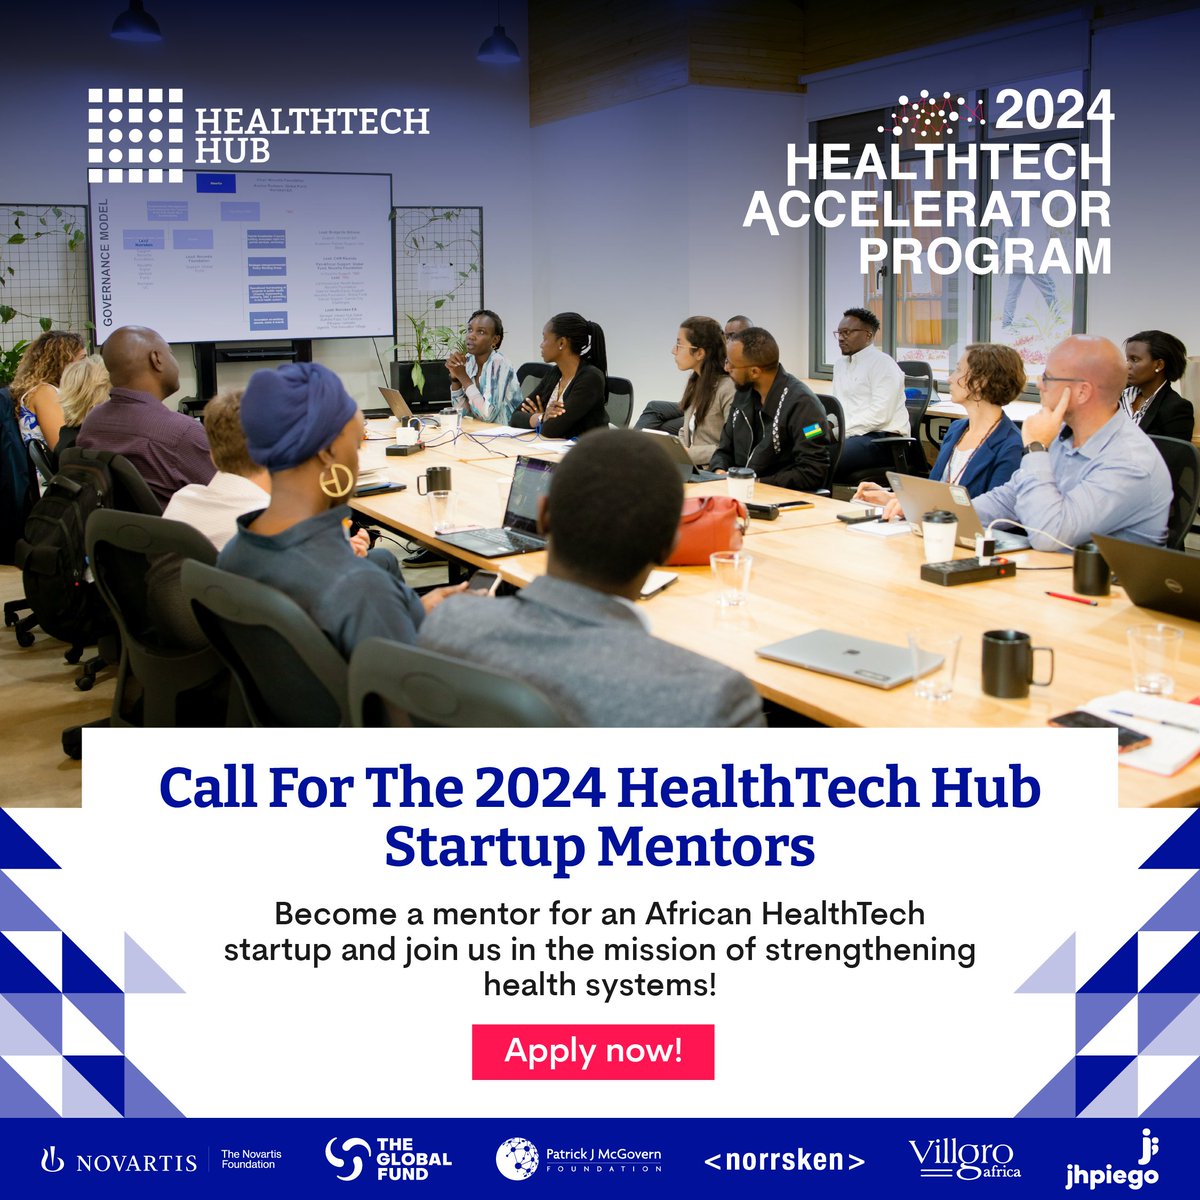 Call for 2024 #HealthTech Hub Startup mentors! Our accelerator program provides startups with resources & support they need to grow their businesses, and mentors are essential to this process. Learn more about the qualifications and apply here: thehealthtech.org/apply/mentorsh…